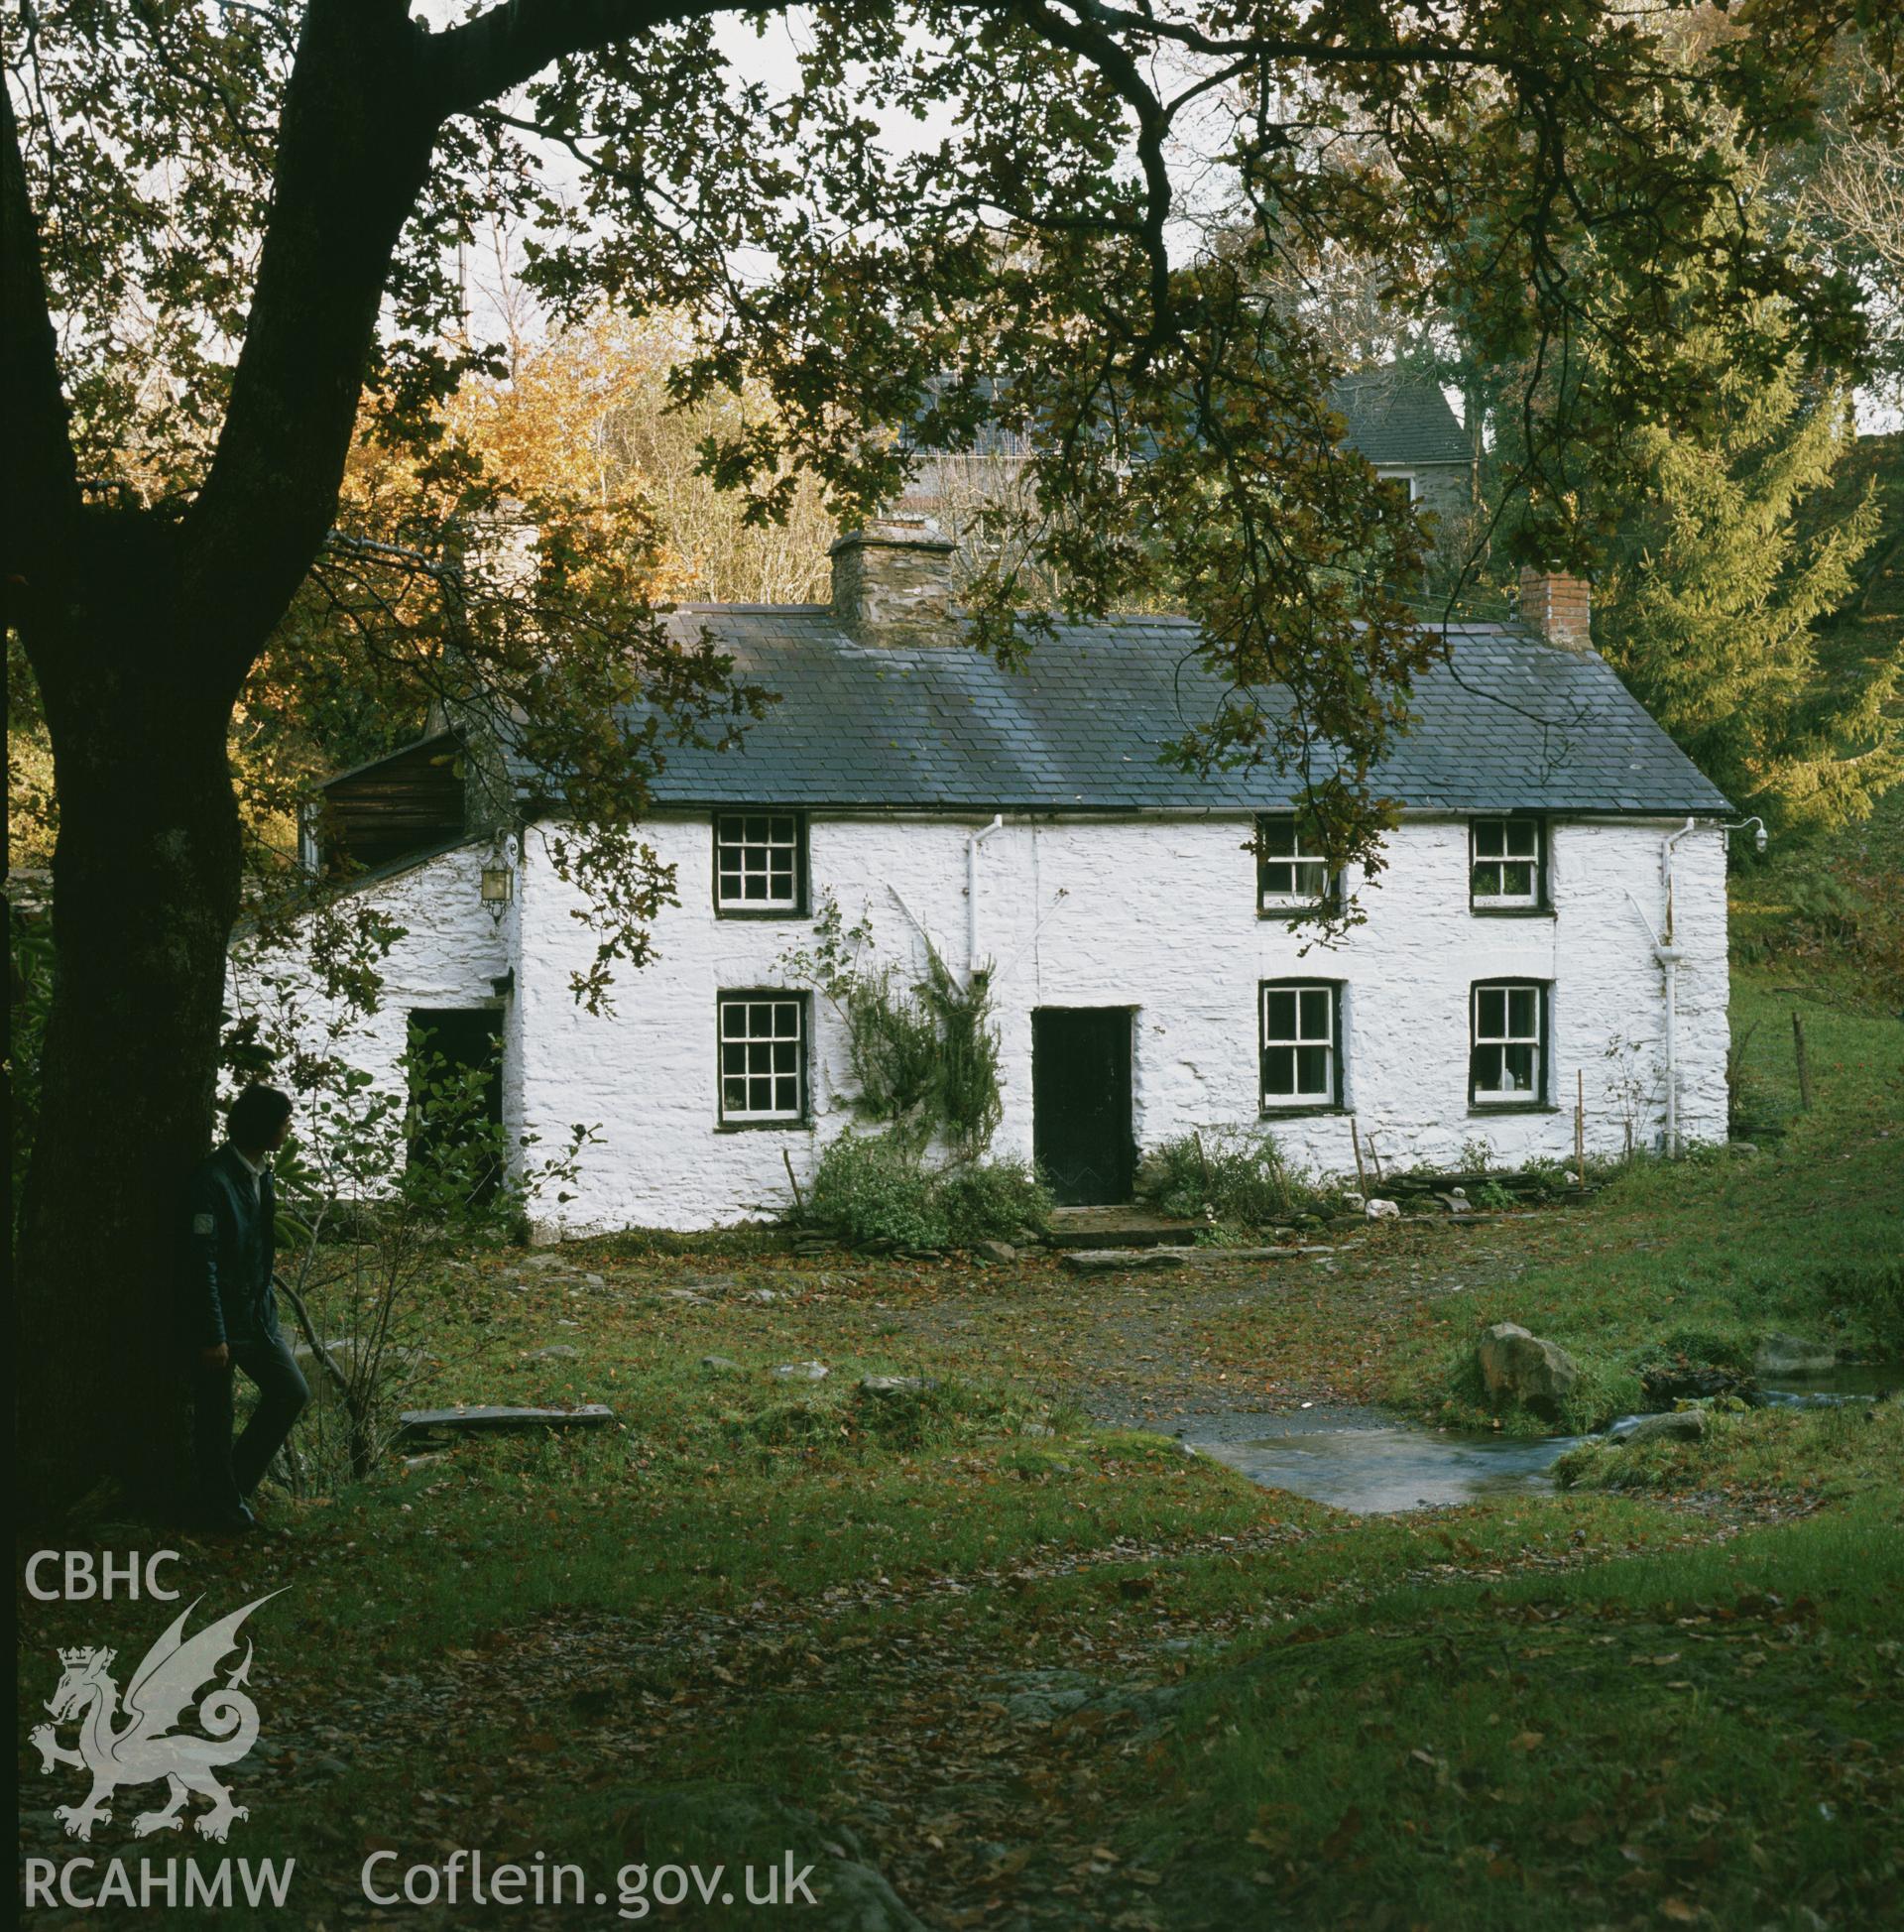 RCAHMW colour transparency of an exterior view of Wenffrwd, Ysgubor y Coed.